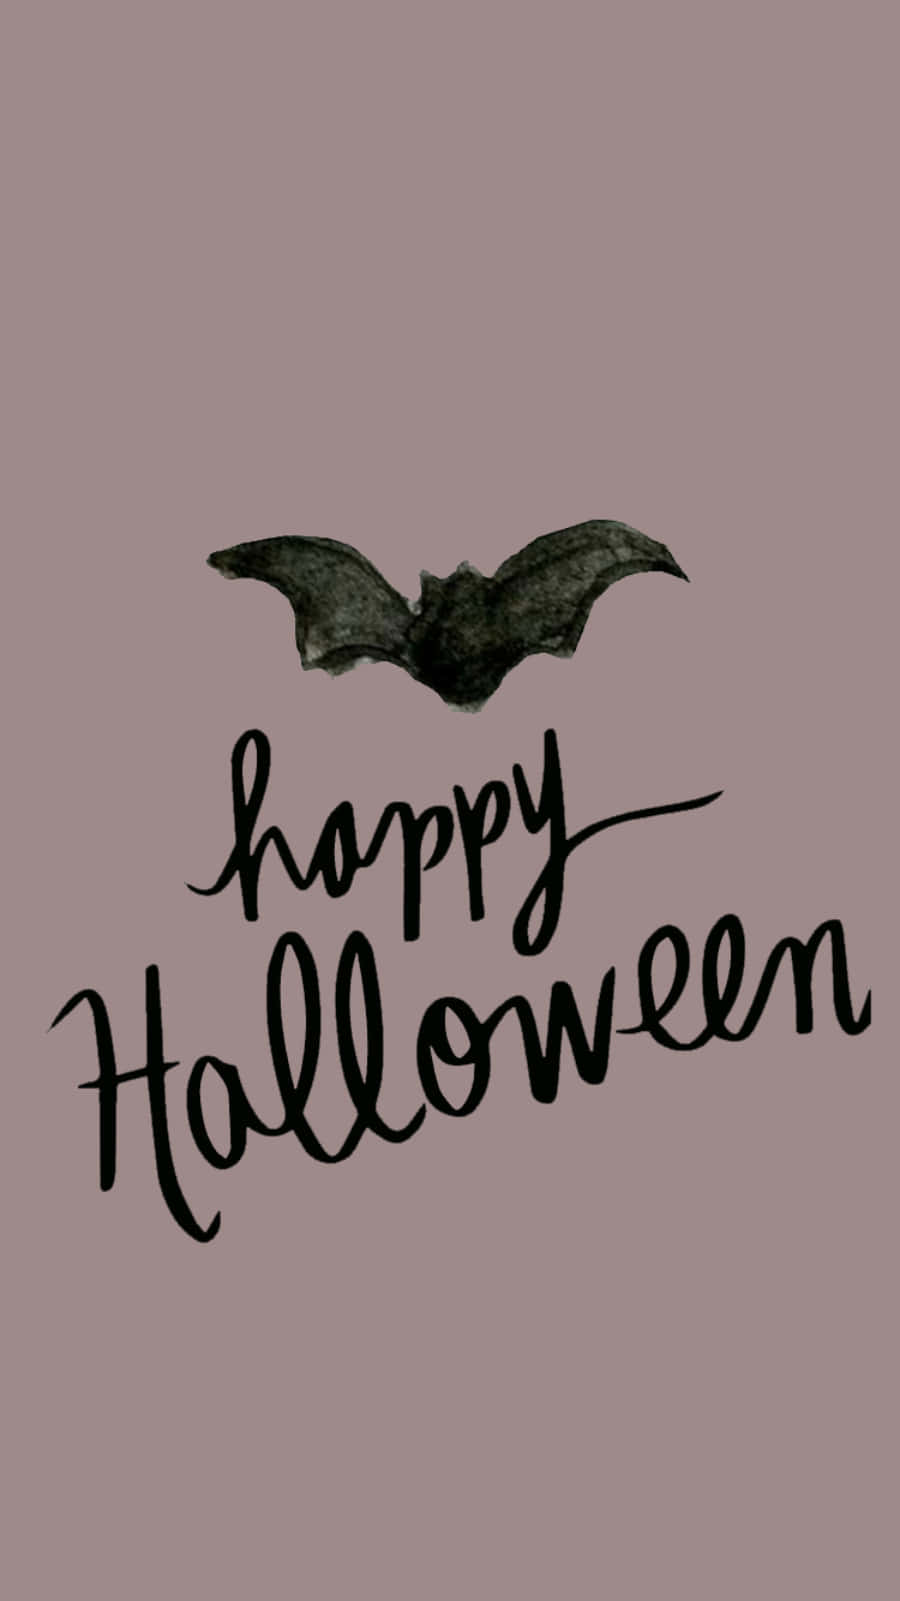 Happy halloween with a bat flying over it - Cute Halloween